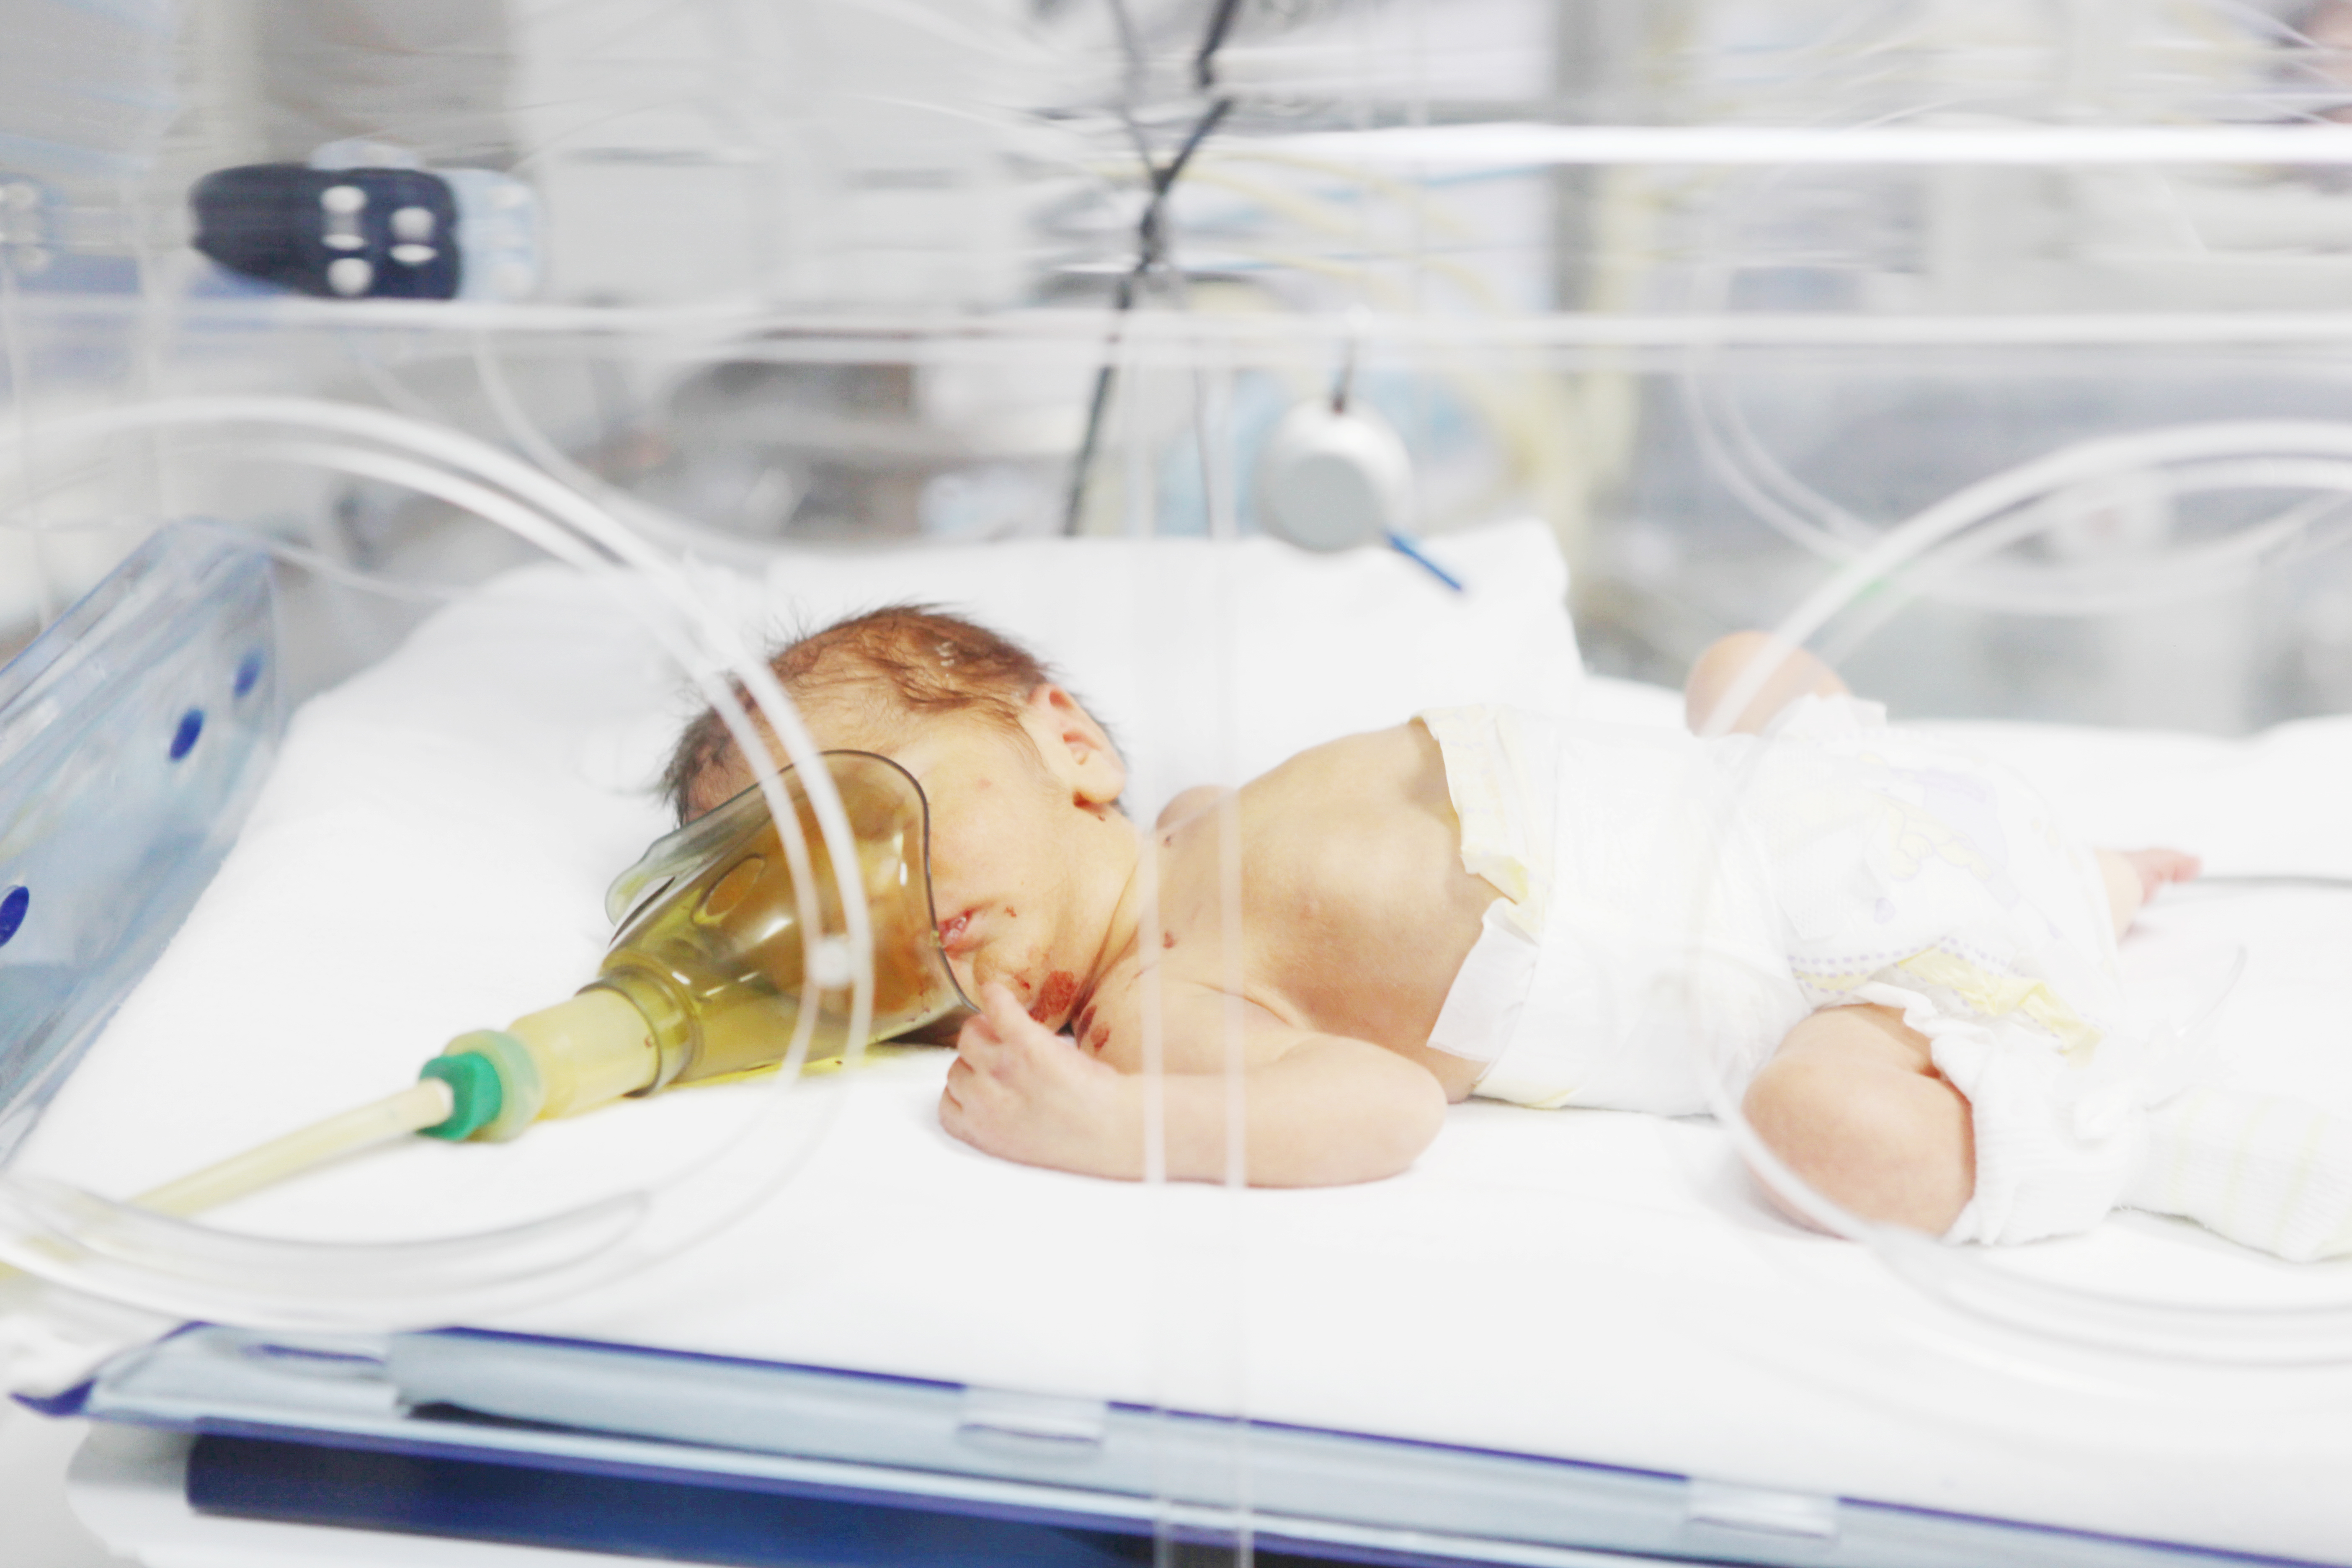 Image of a child in incubator - born too early